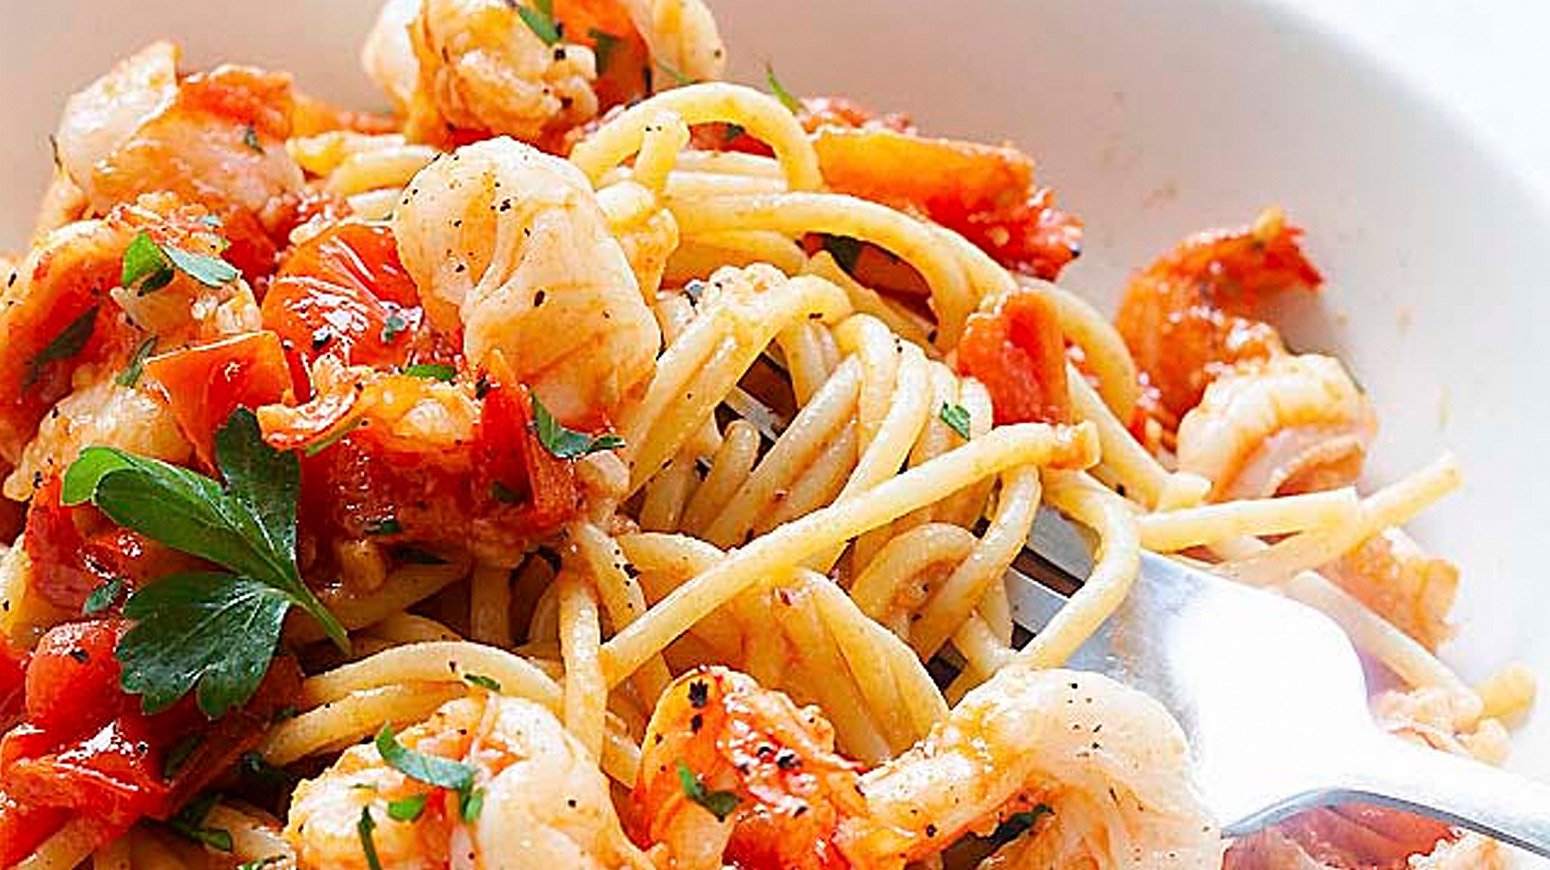 A simple Shrimp Pasta that’s perfect for the summertime! Similar to the Shrimp Fra Diavolo, this recipe is made with garlic and tomatoes bursting with summer goodness. This is a proper Italian recipe, the authentic way Italian home cooks and chefs make s